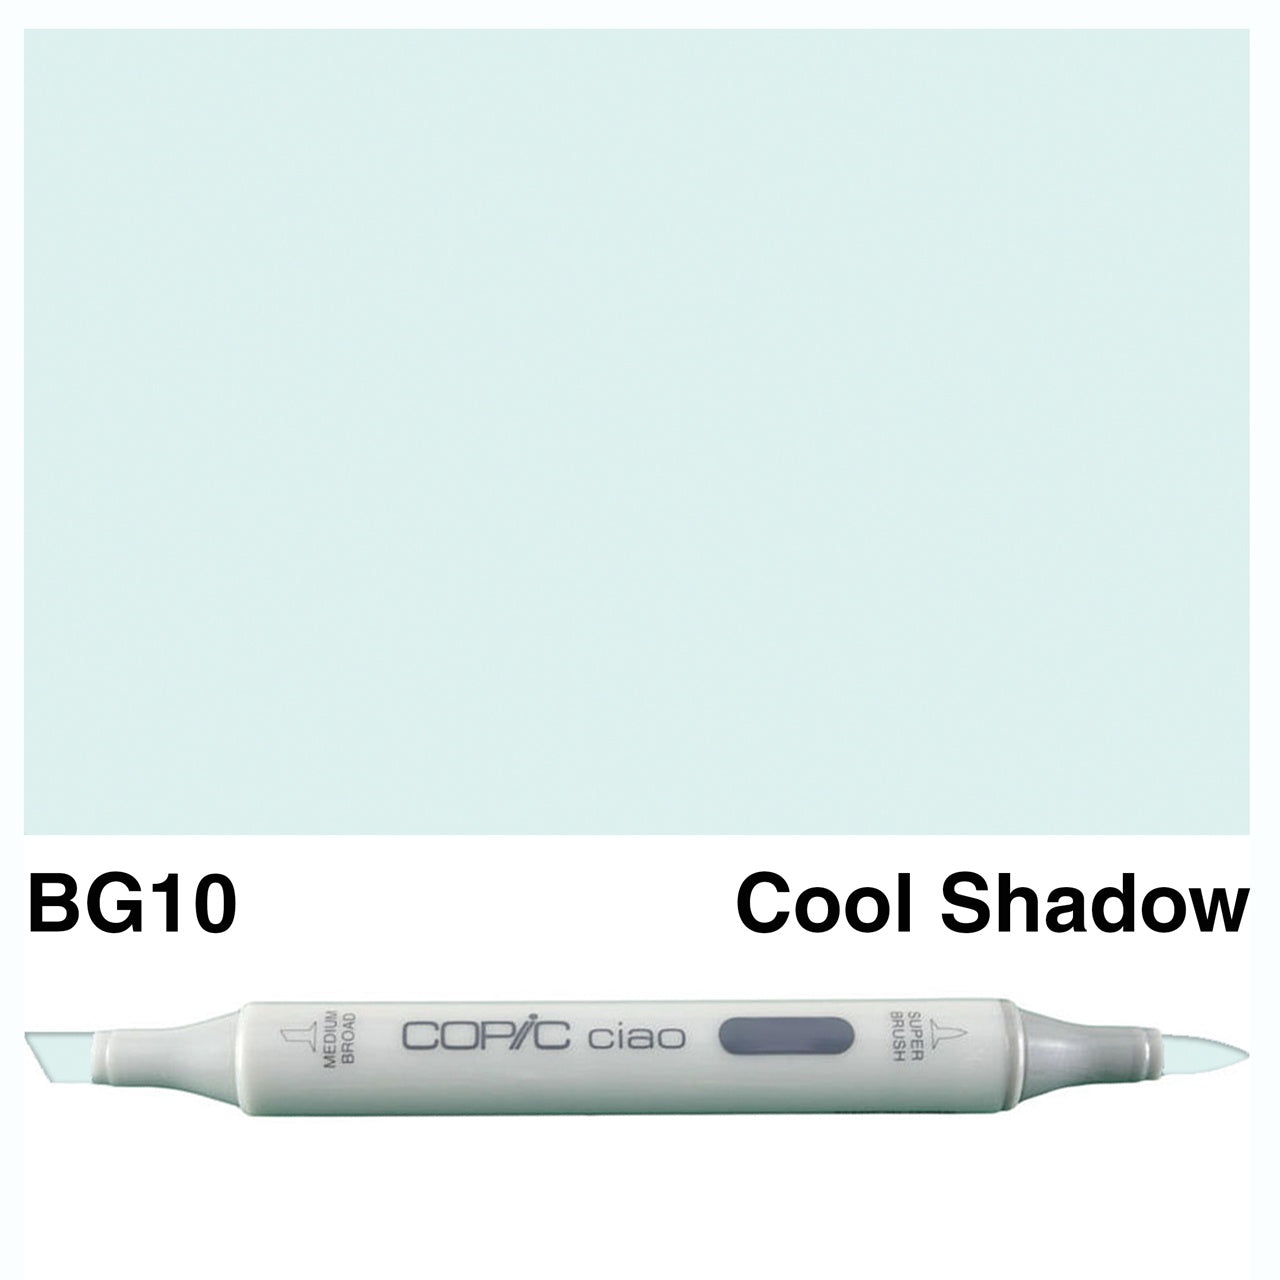 Copic Ciao Marker BG10 - Cool Shadow